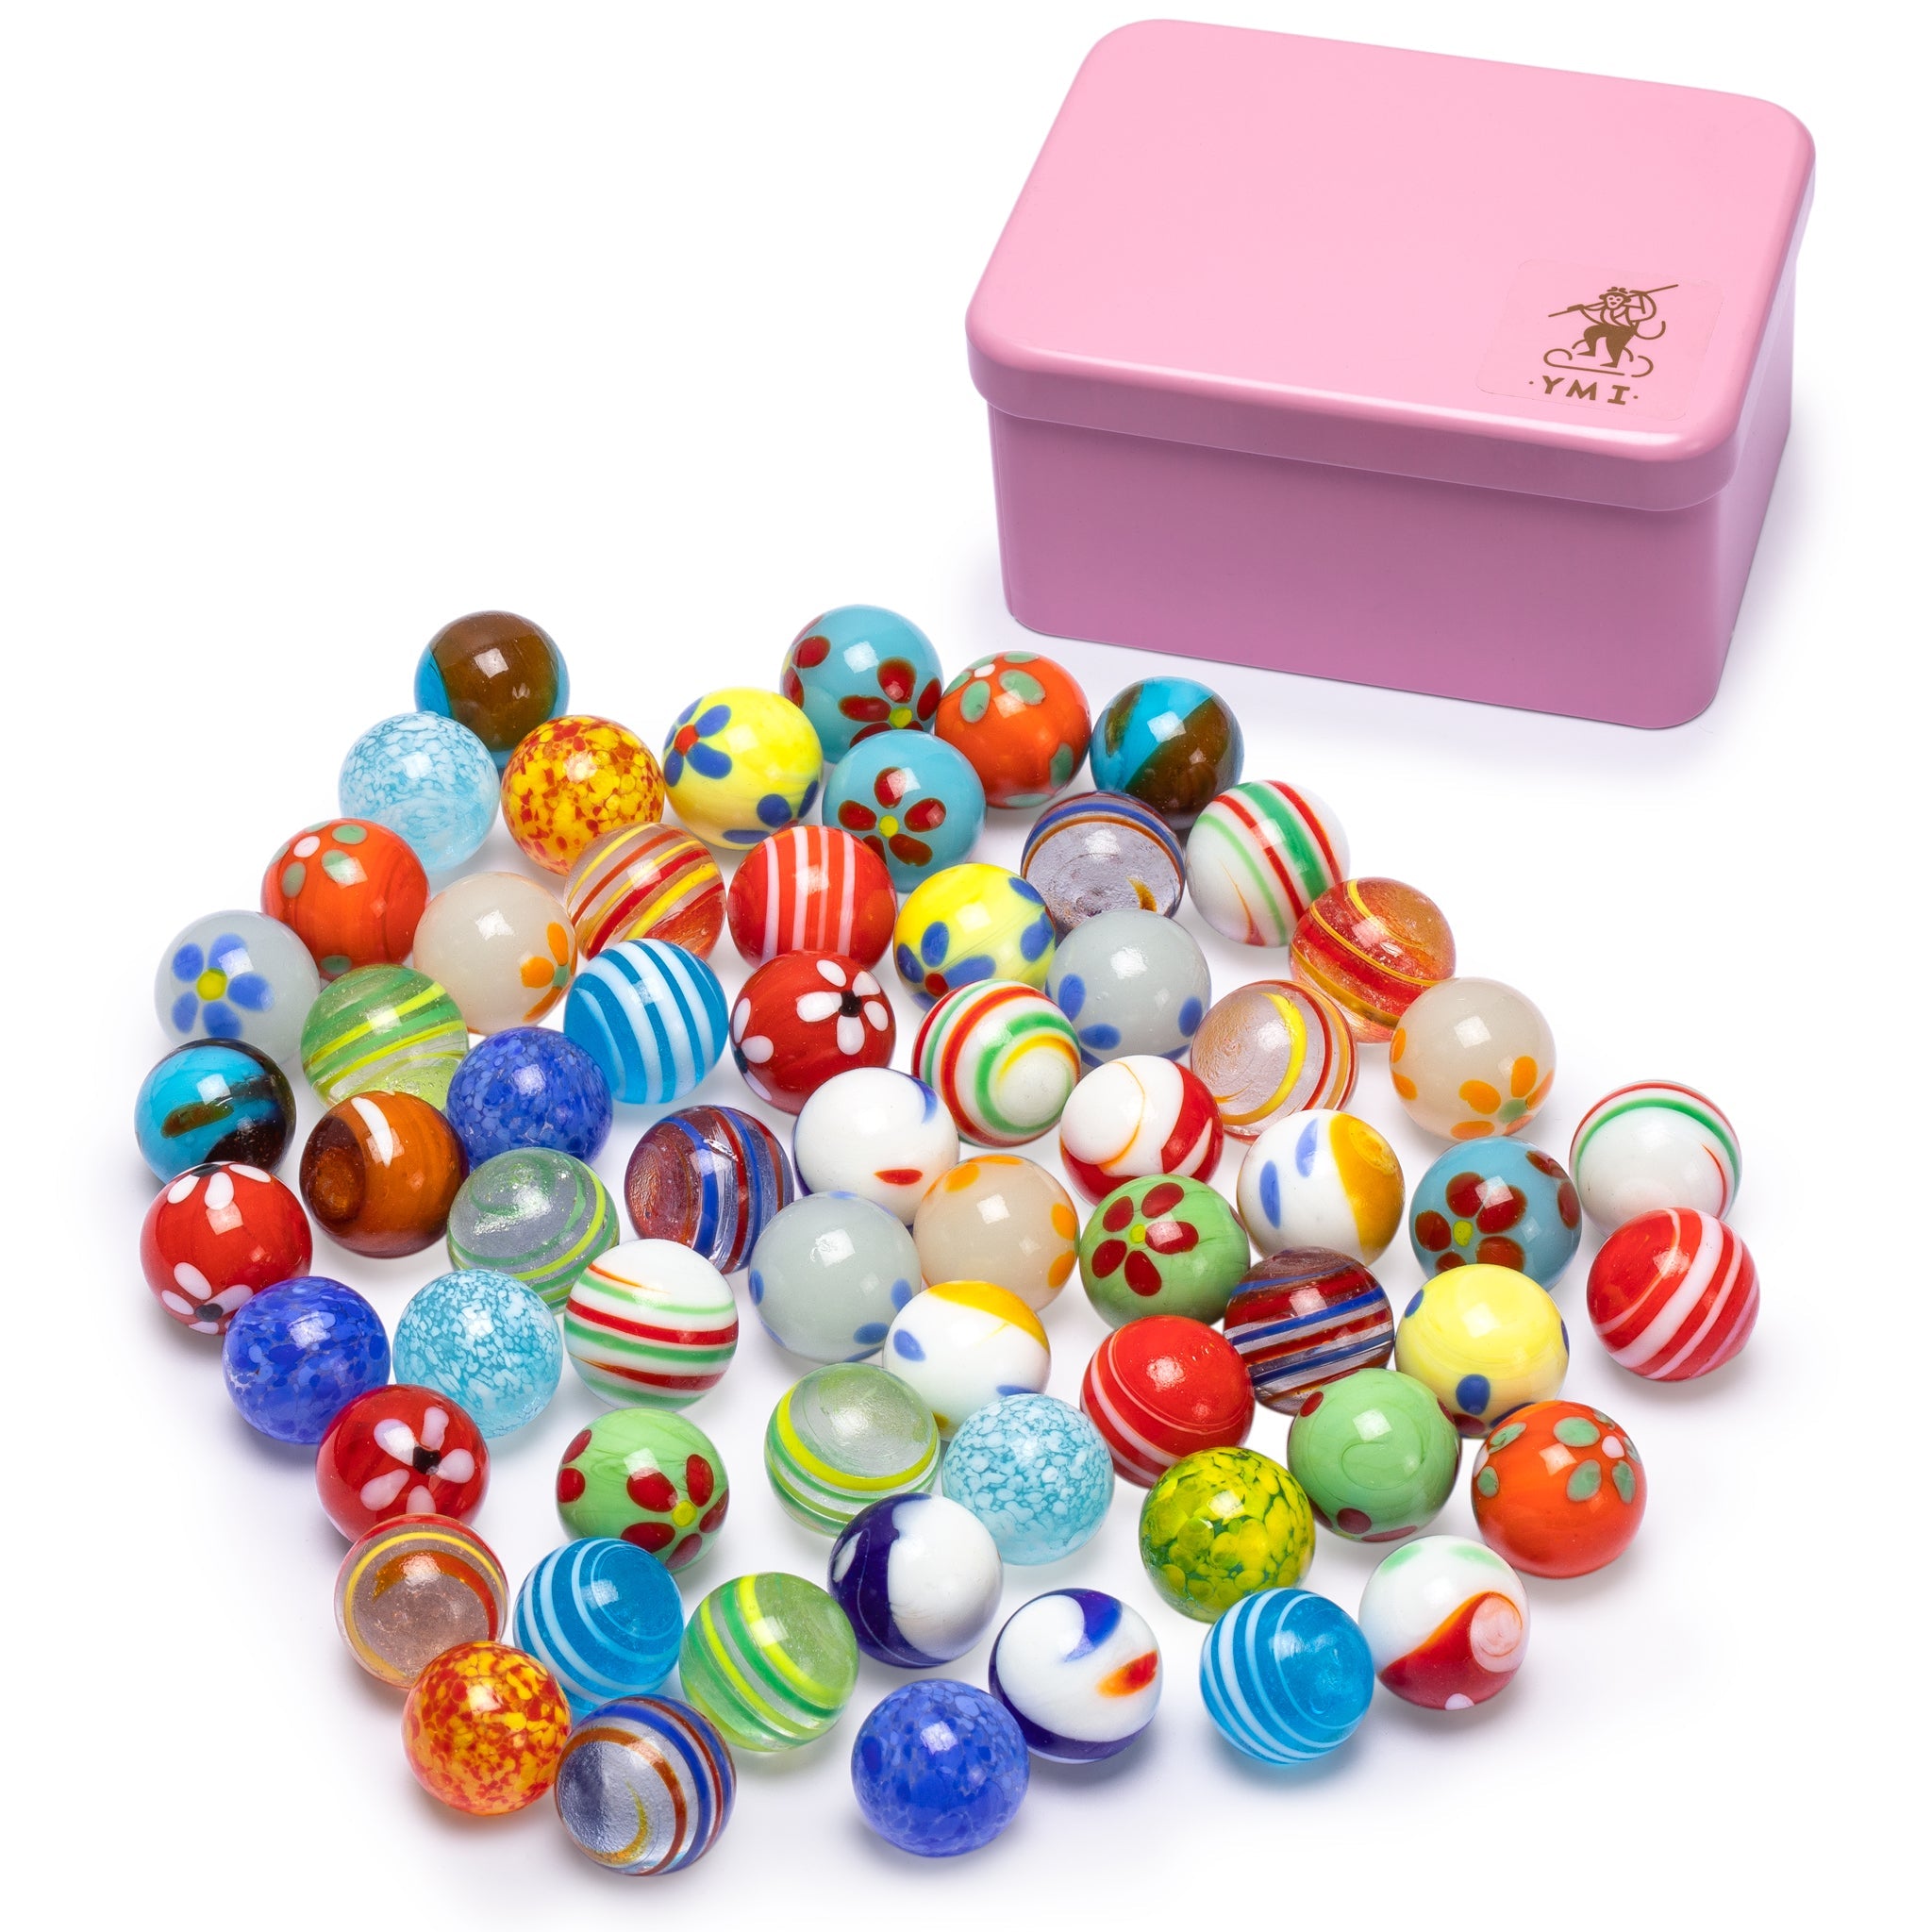 Collector's Series Assorted Marbles Set in Tin Box, 